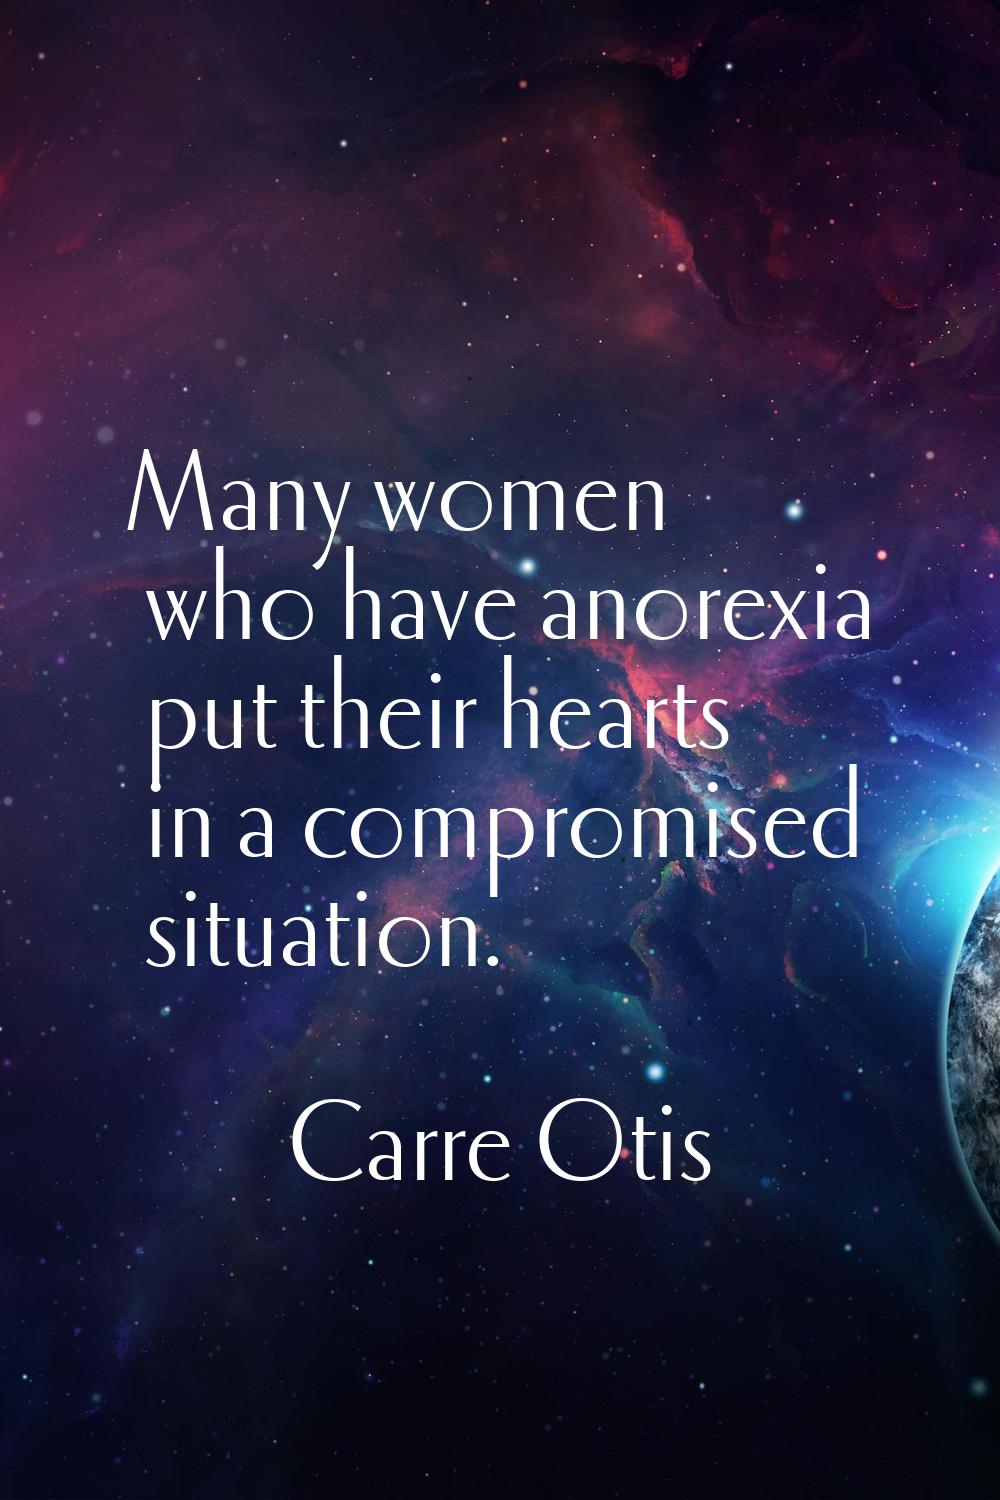 Many women who have anorexia put their hearts in a compromised situation.